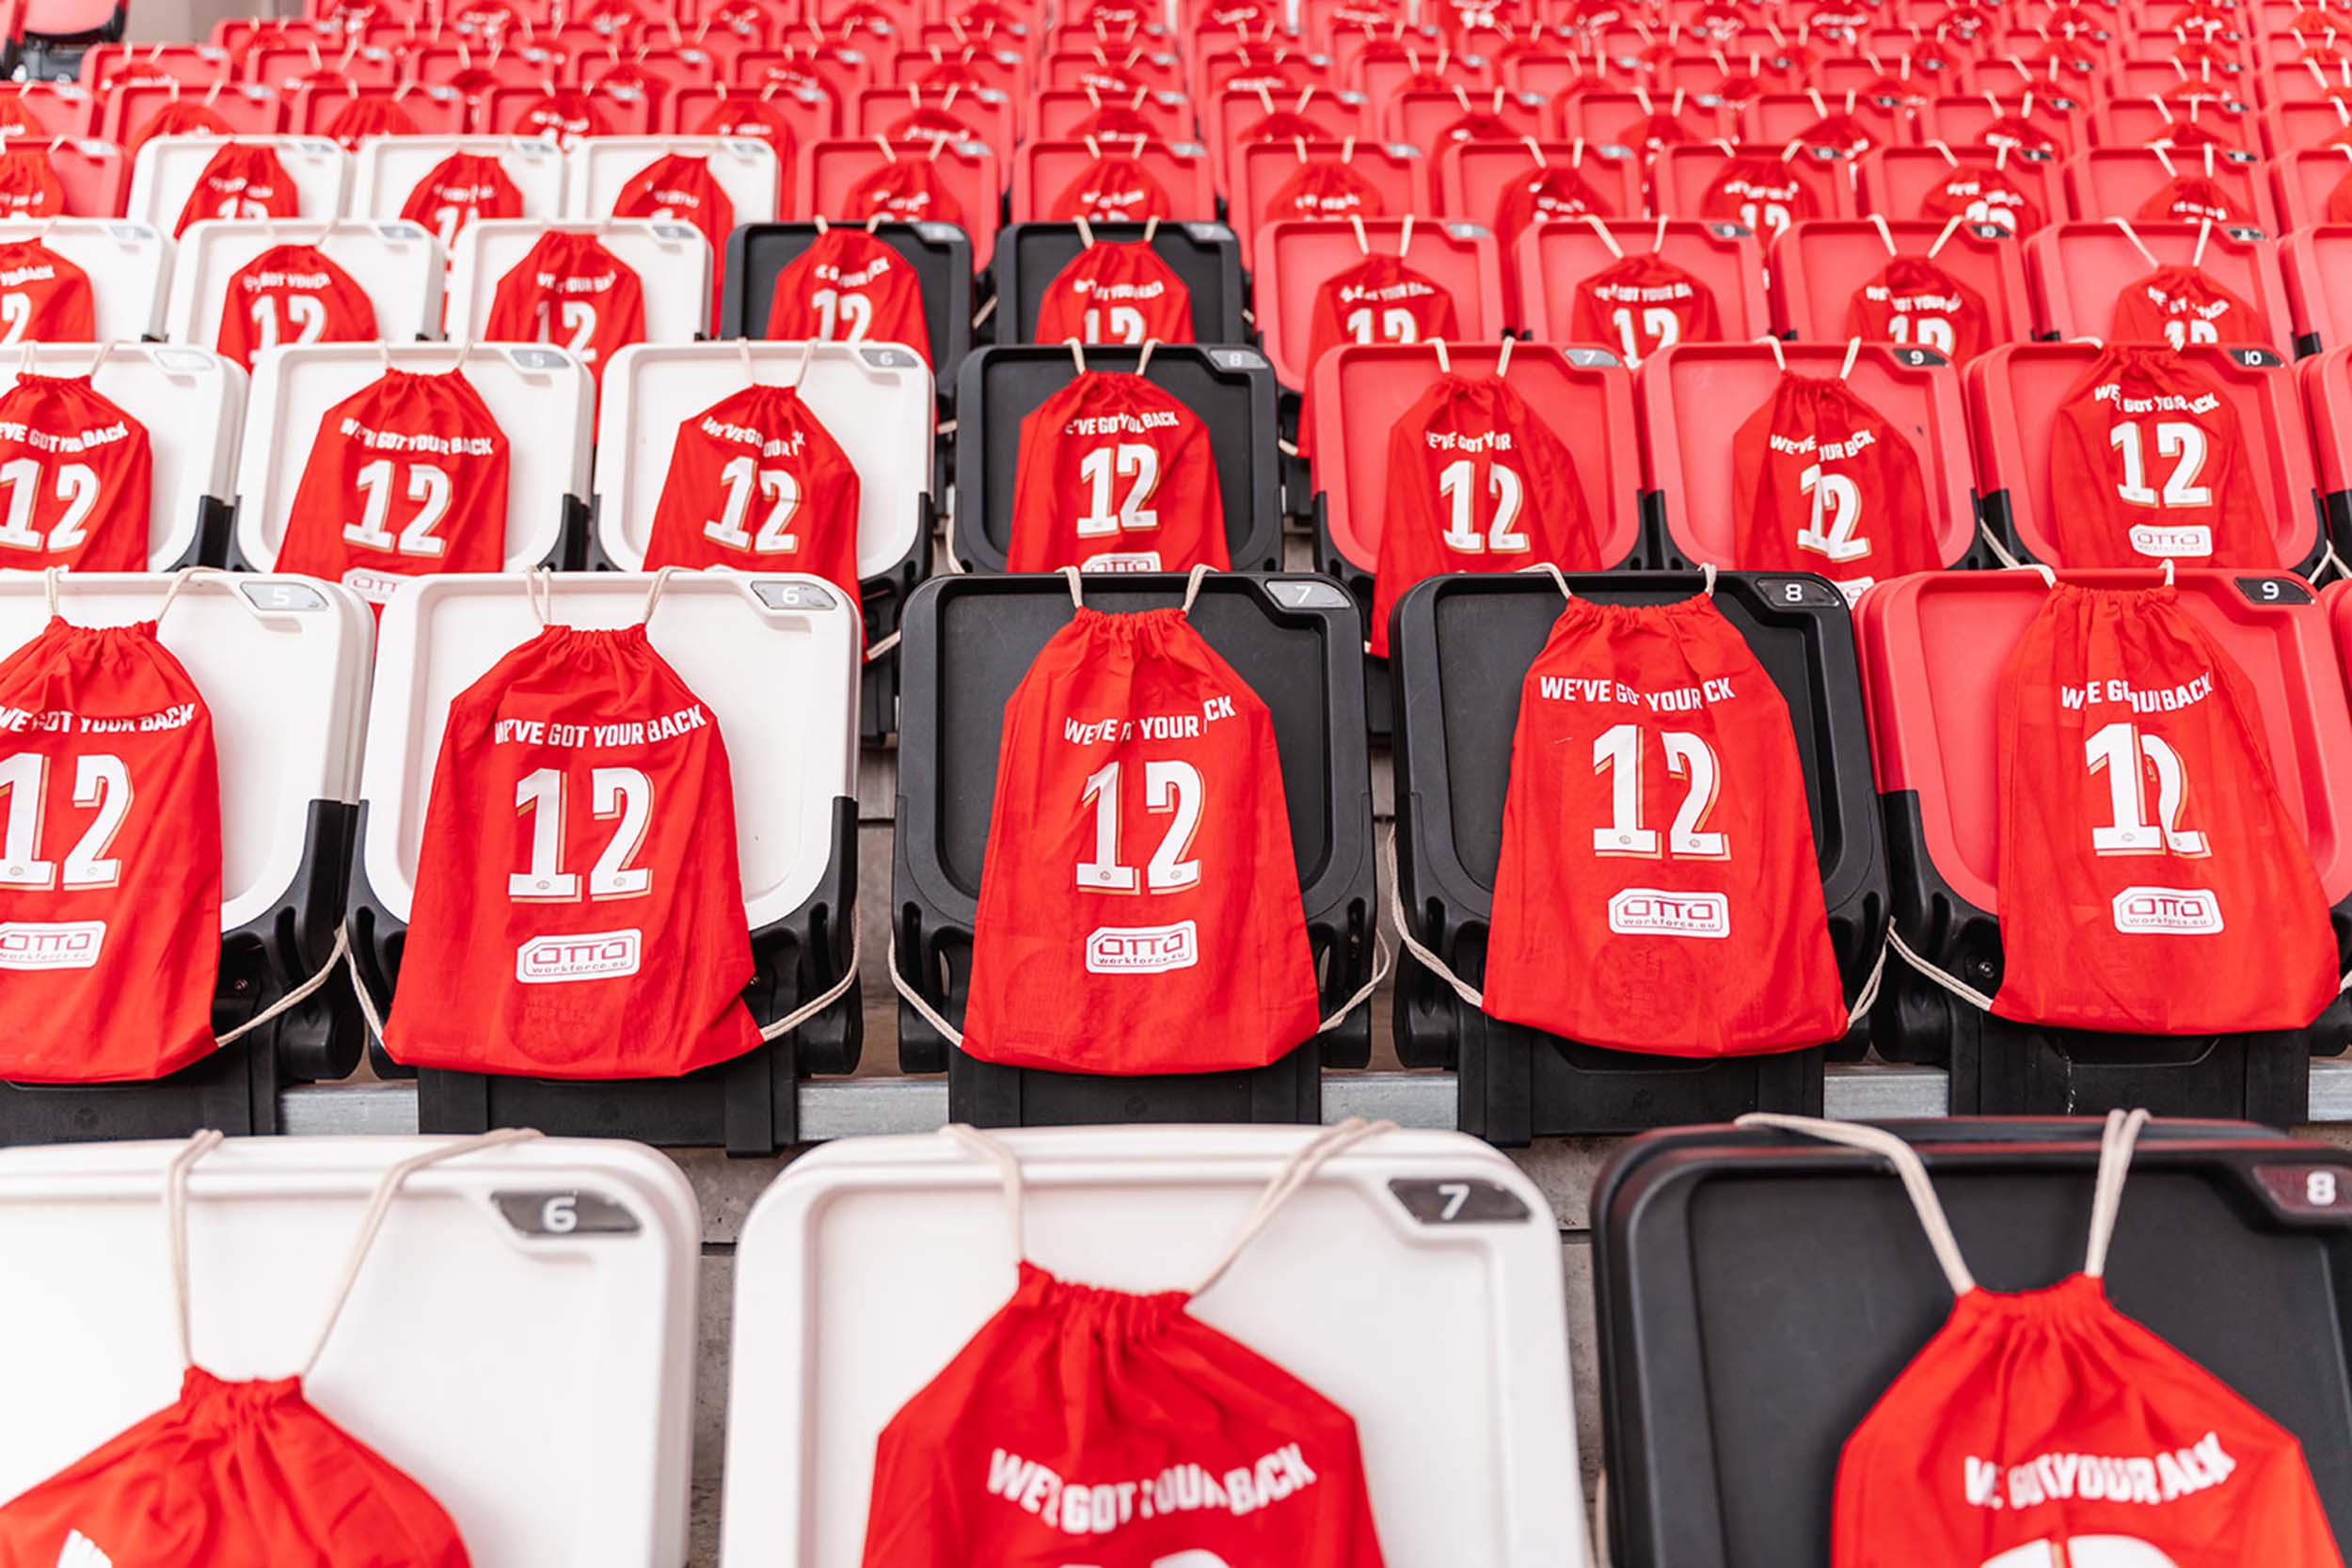 We've got your back backpacks in the stands during PSV - Feyenoord Women match